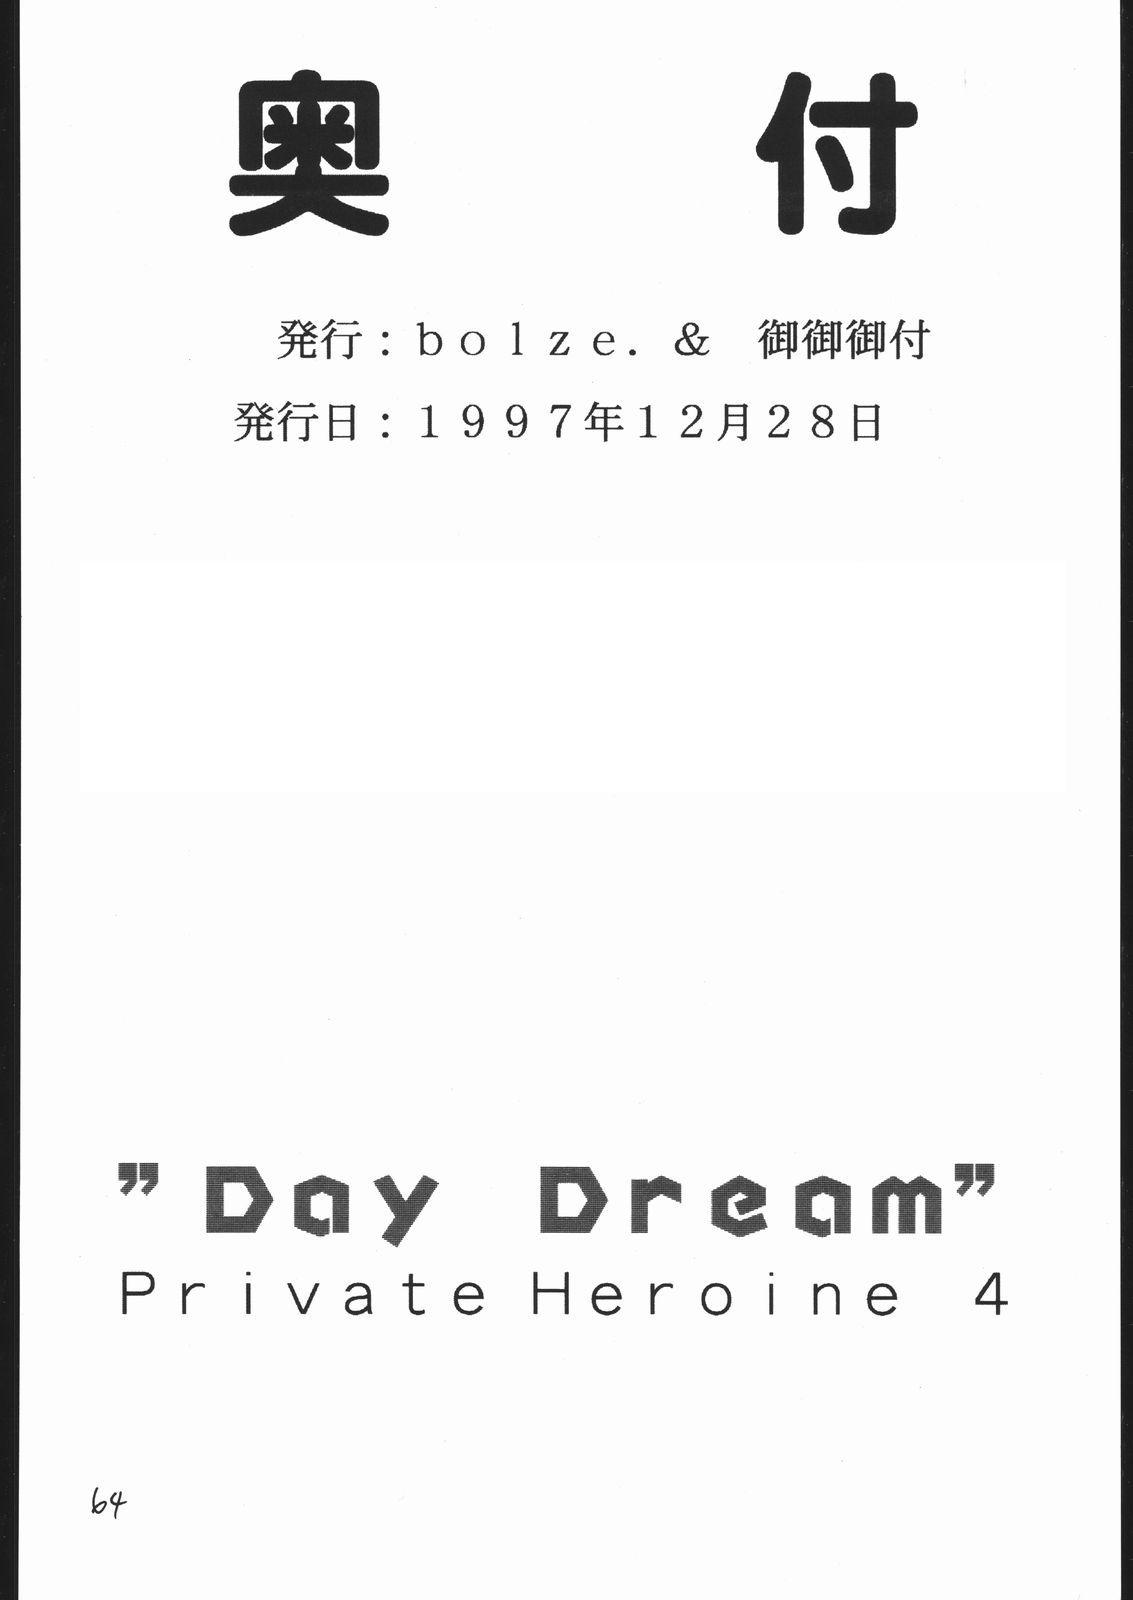 Boss Day Dream Private Heroine 4 - To heart Tokimeki memorial Breasts - Page 63